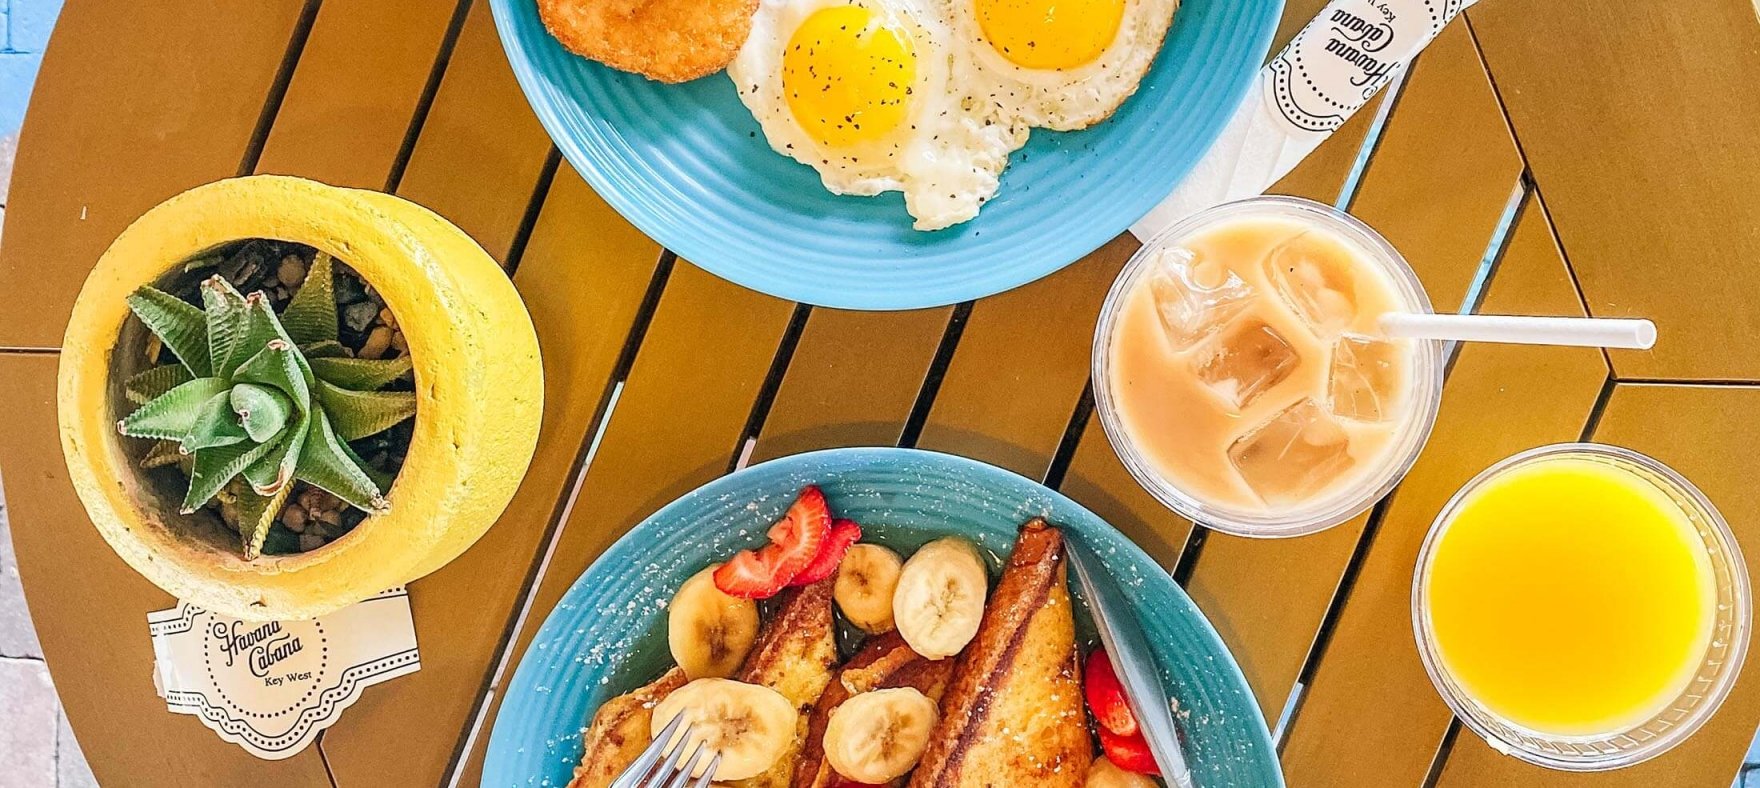 A pair of hands using cutleries on french toasts while another hand is holding up a smoothie next to a egg and bacon breakfast